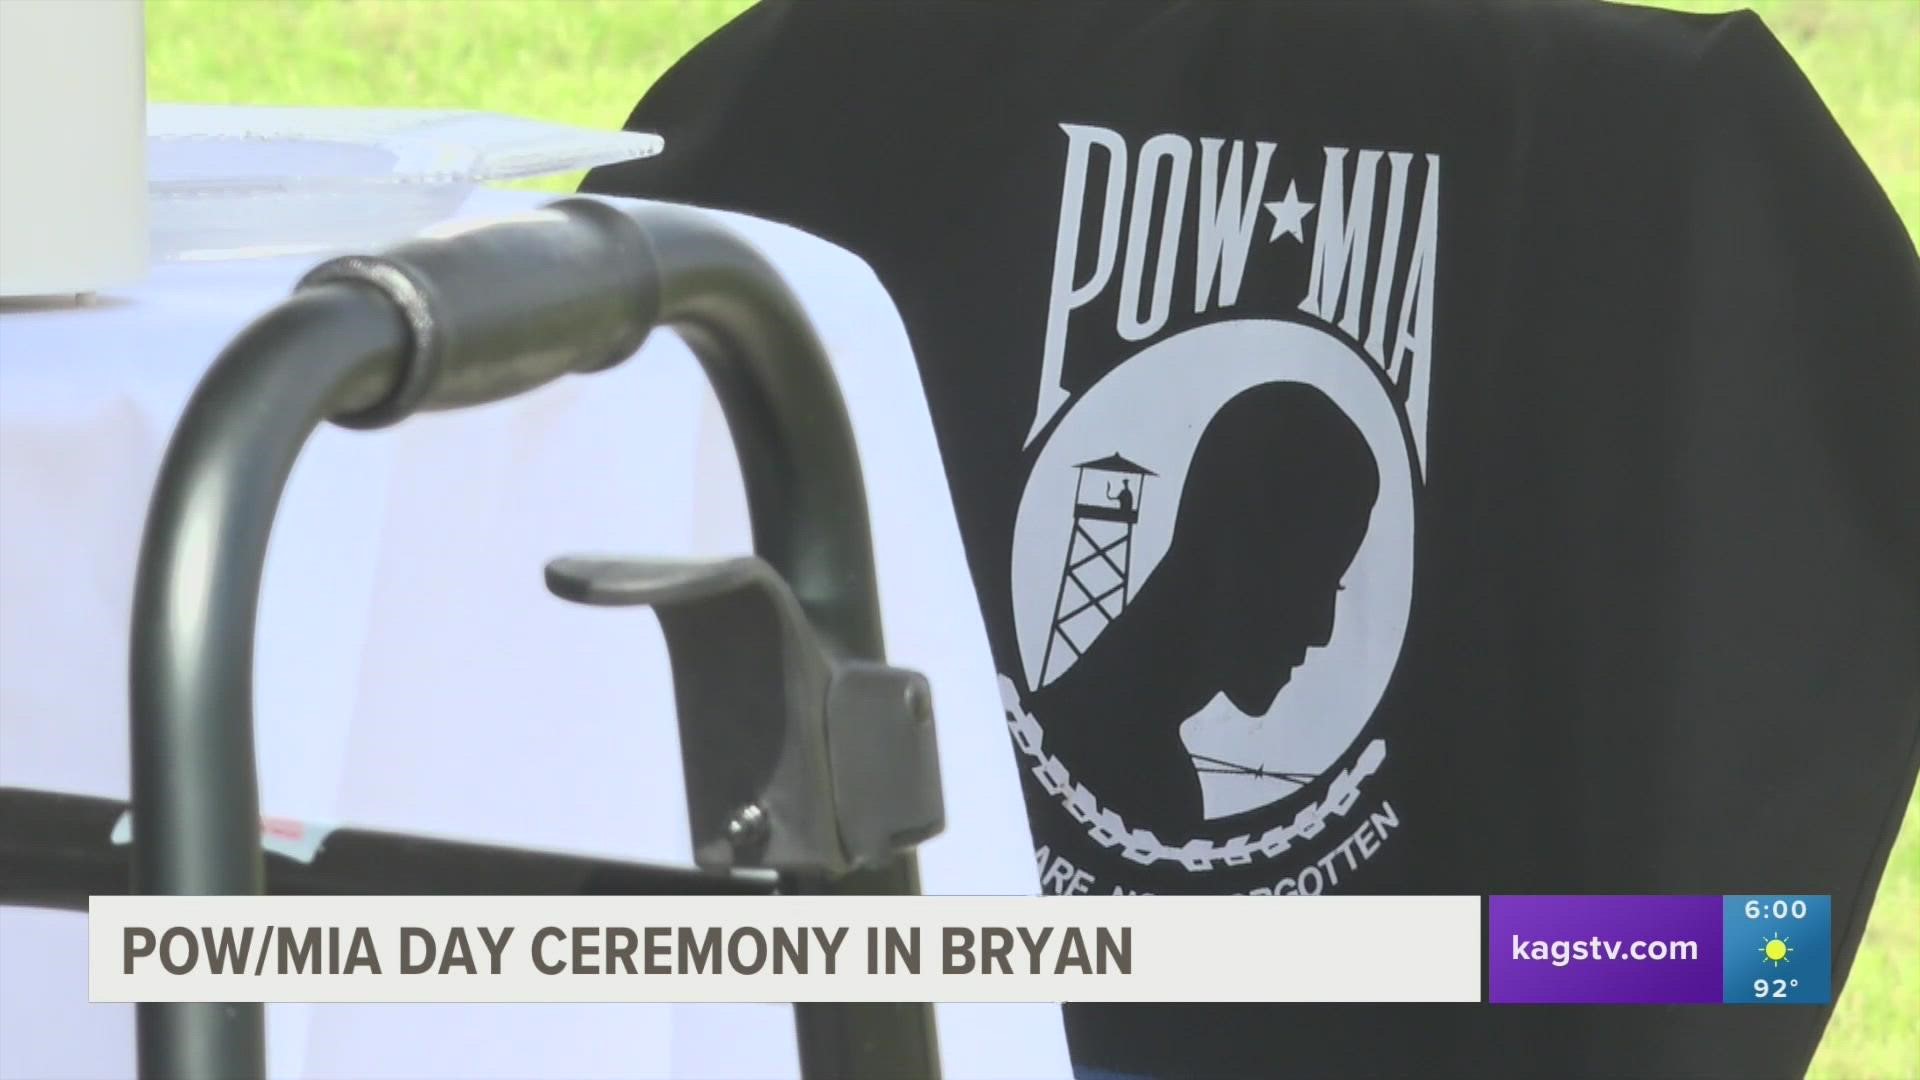 Denise DuBois, the daughter of a soldier who went missing in battle, said that Friday's ceremony was the first time she was able to share her father's story.